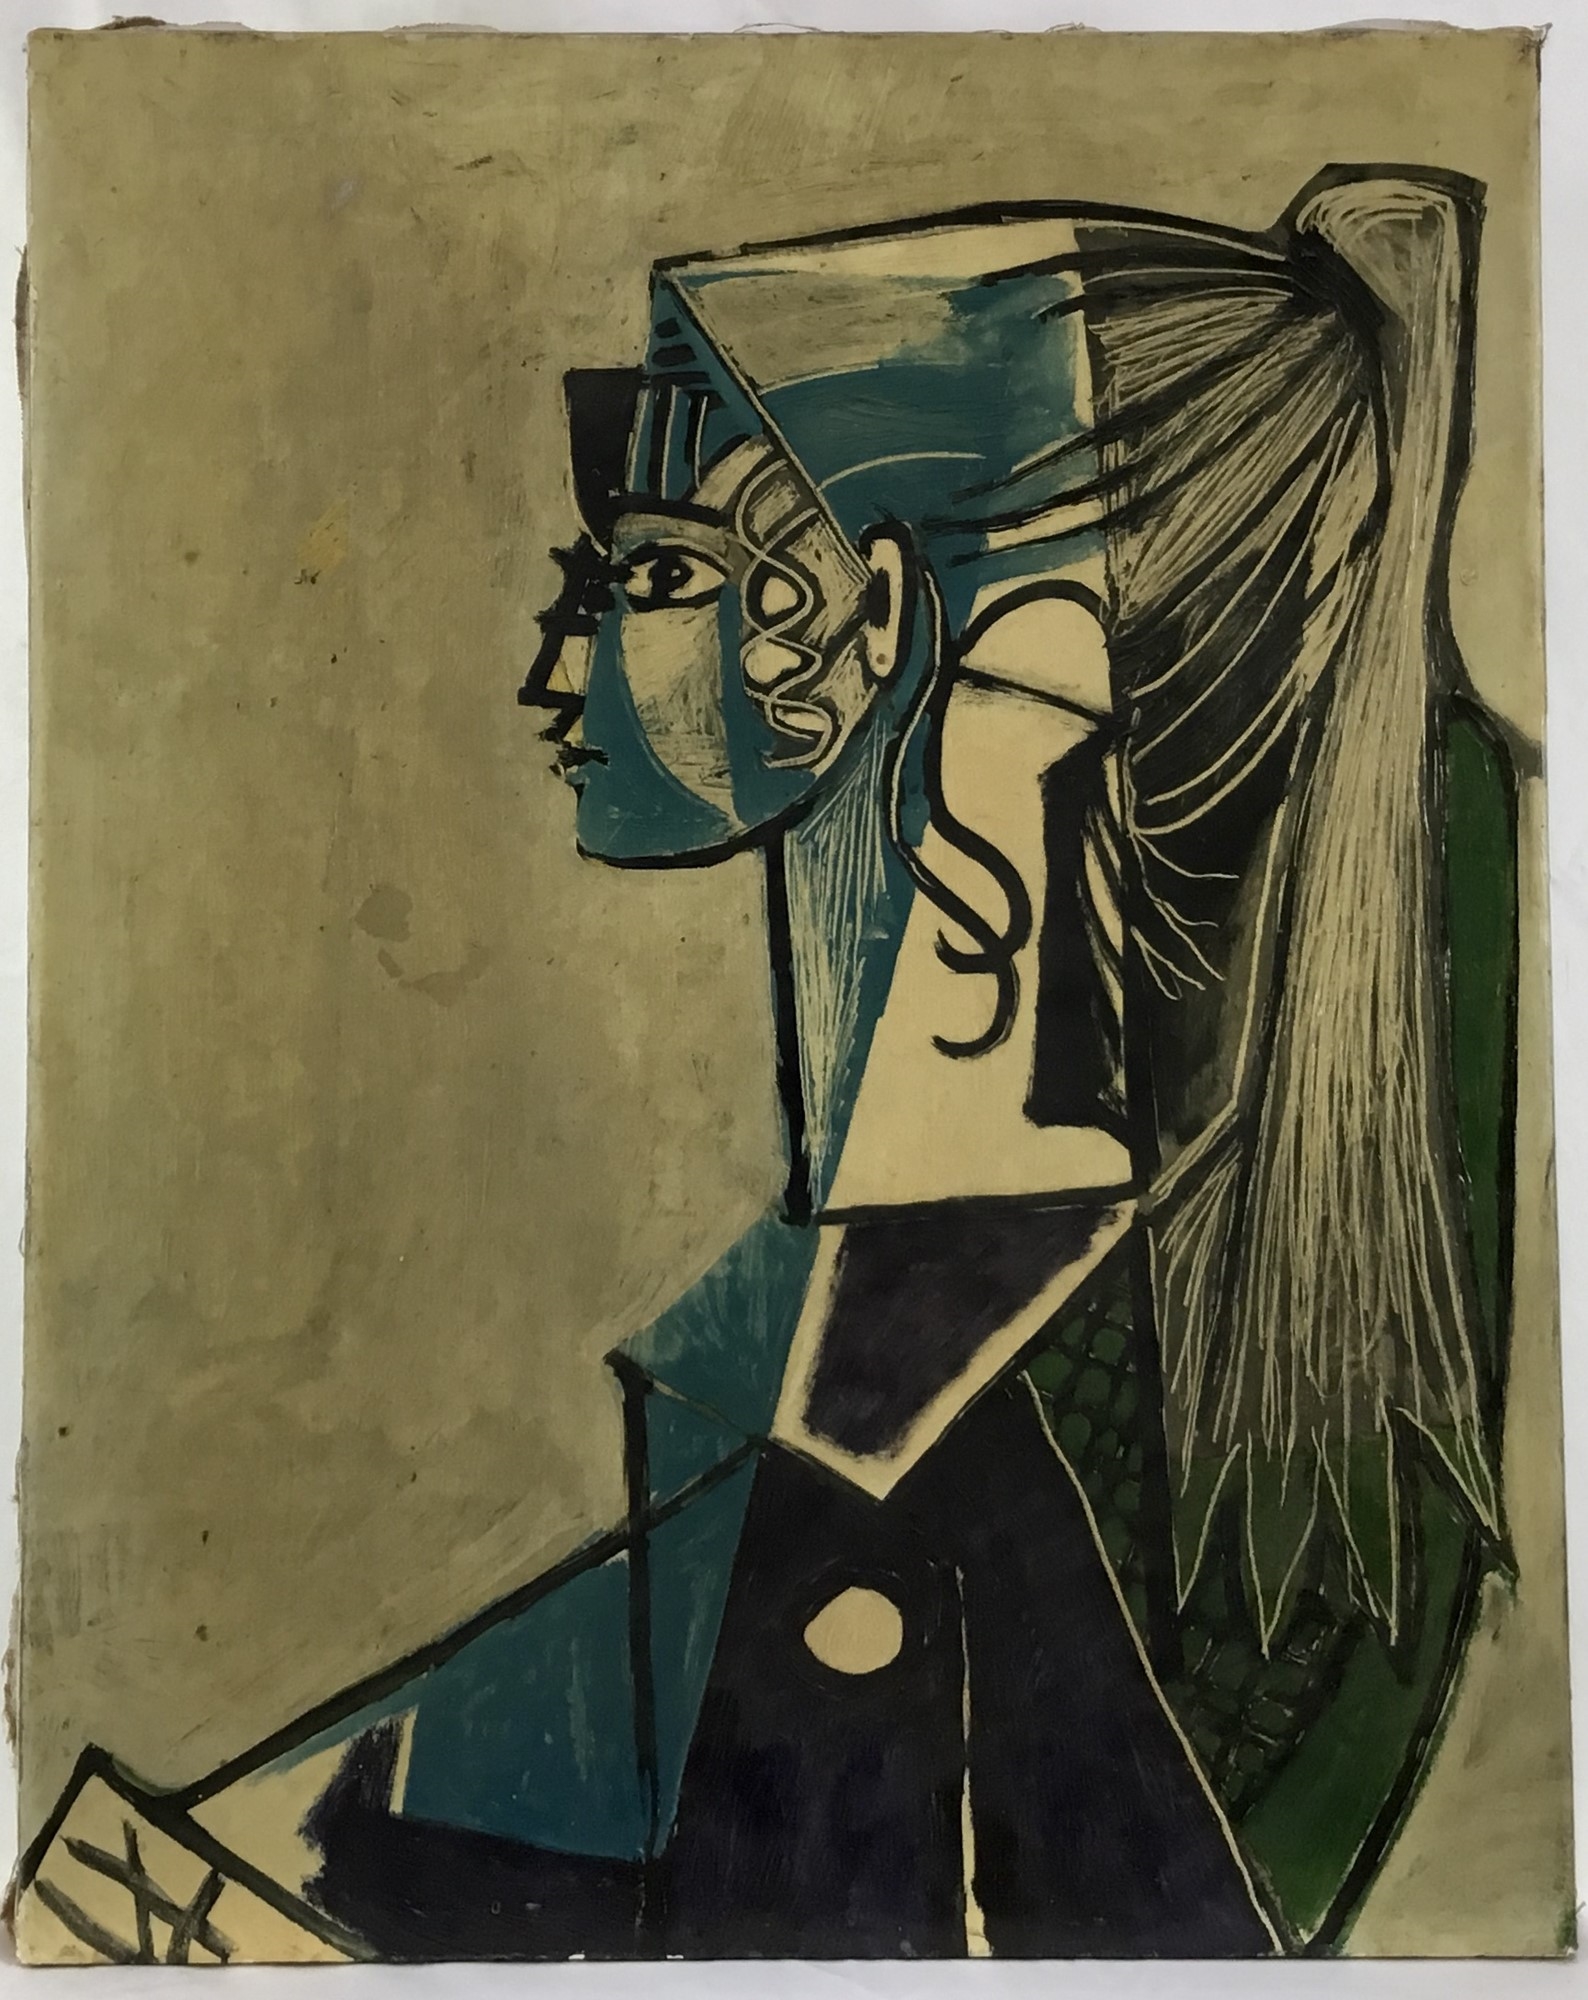 Artwork by Pablo Picasso, Portrait of Sylvette David, Made of cromolithograph